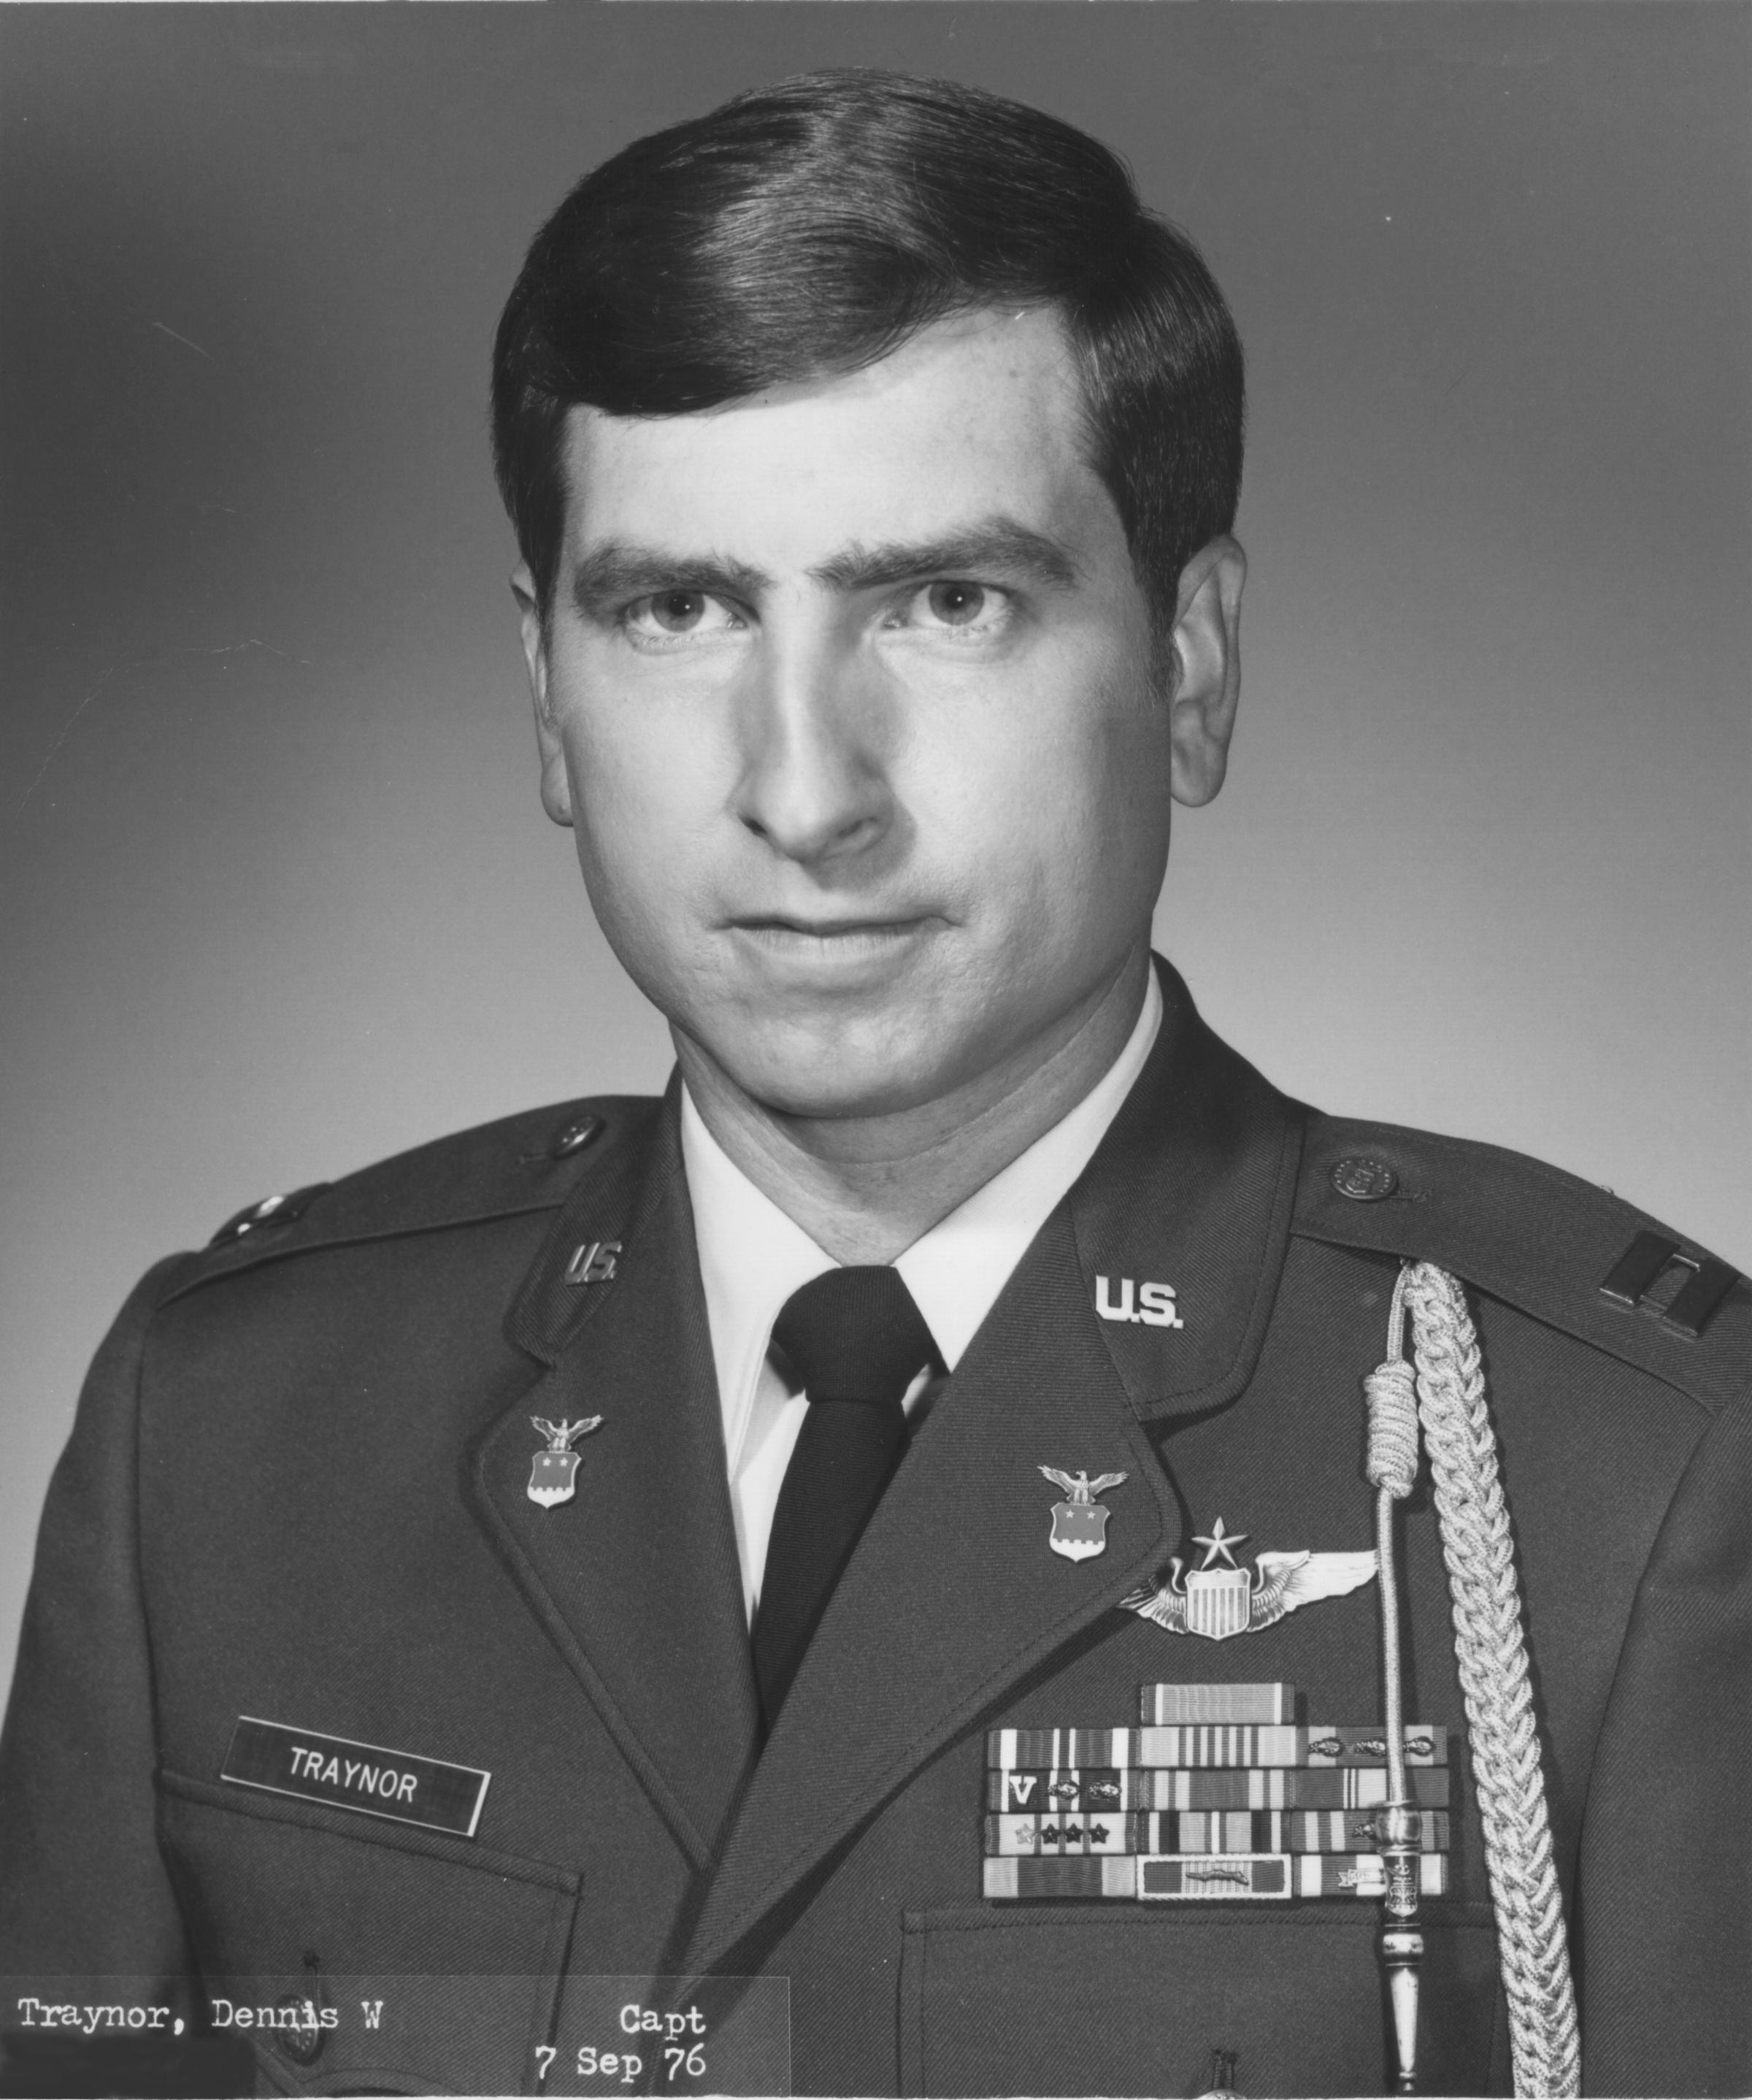 Capt. Bud Traynor was piloting the C-5A Galaxy that crashed in 1975 in Saigon as part of Operation Babylif